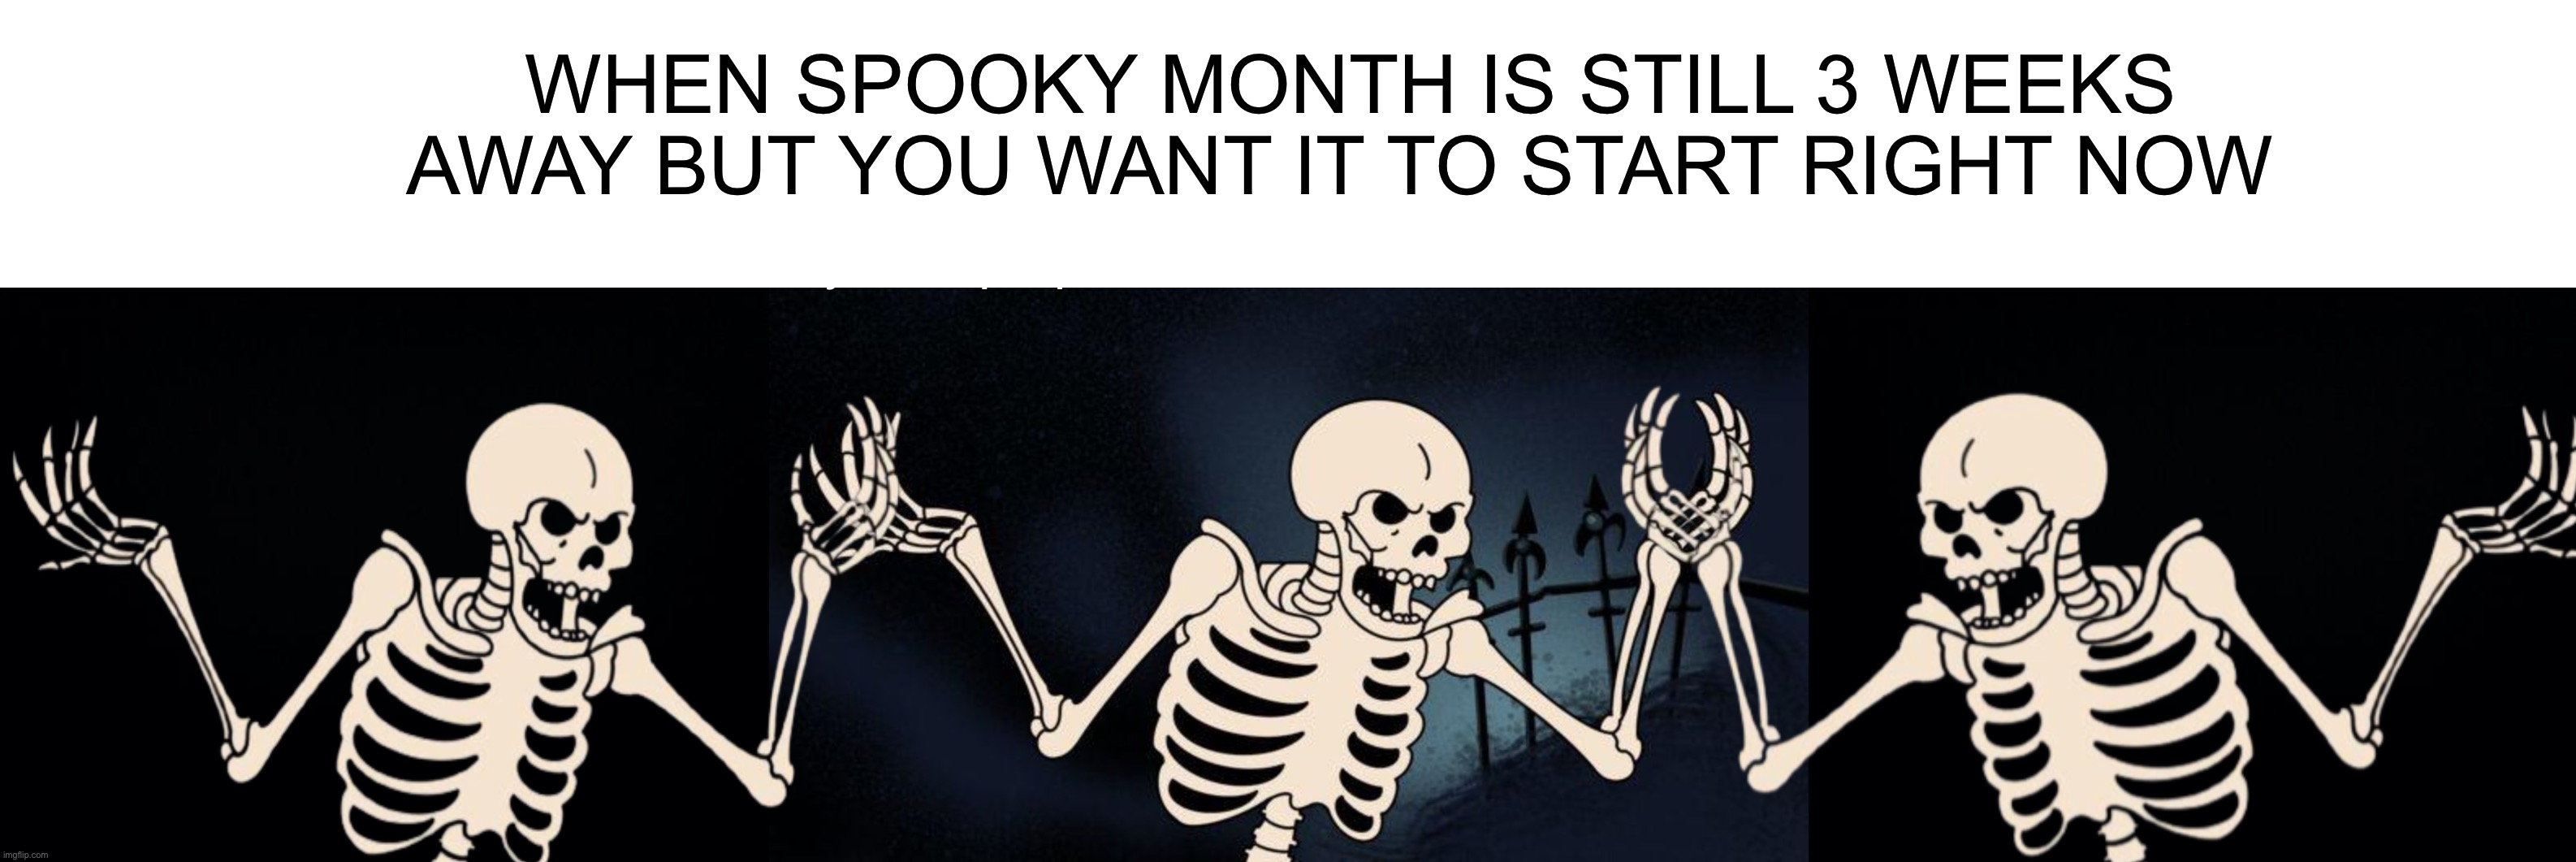 I want it right now | WHEN SPOOKY MONTH IS STILL 3 WEEKS AWAY BUT YOU WANT IT TO START RIGHT NOW | image tagged in black background | made w/ Imgflip meme maker